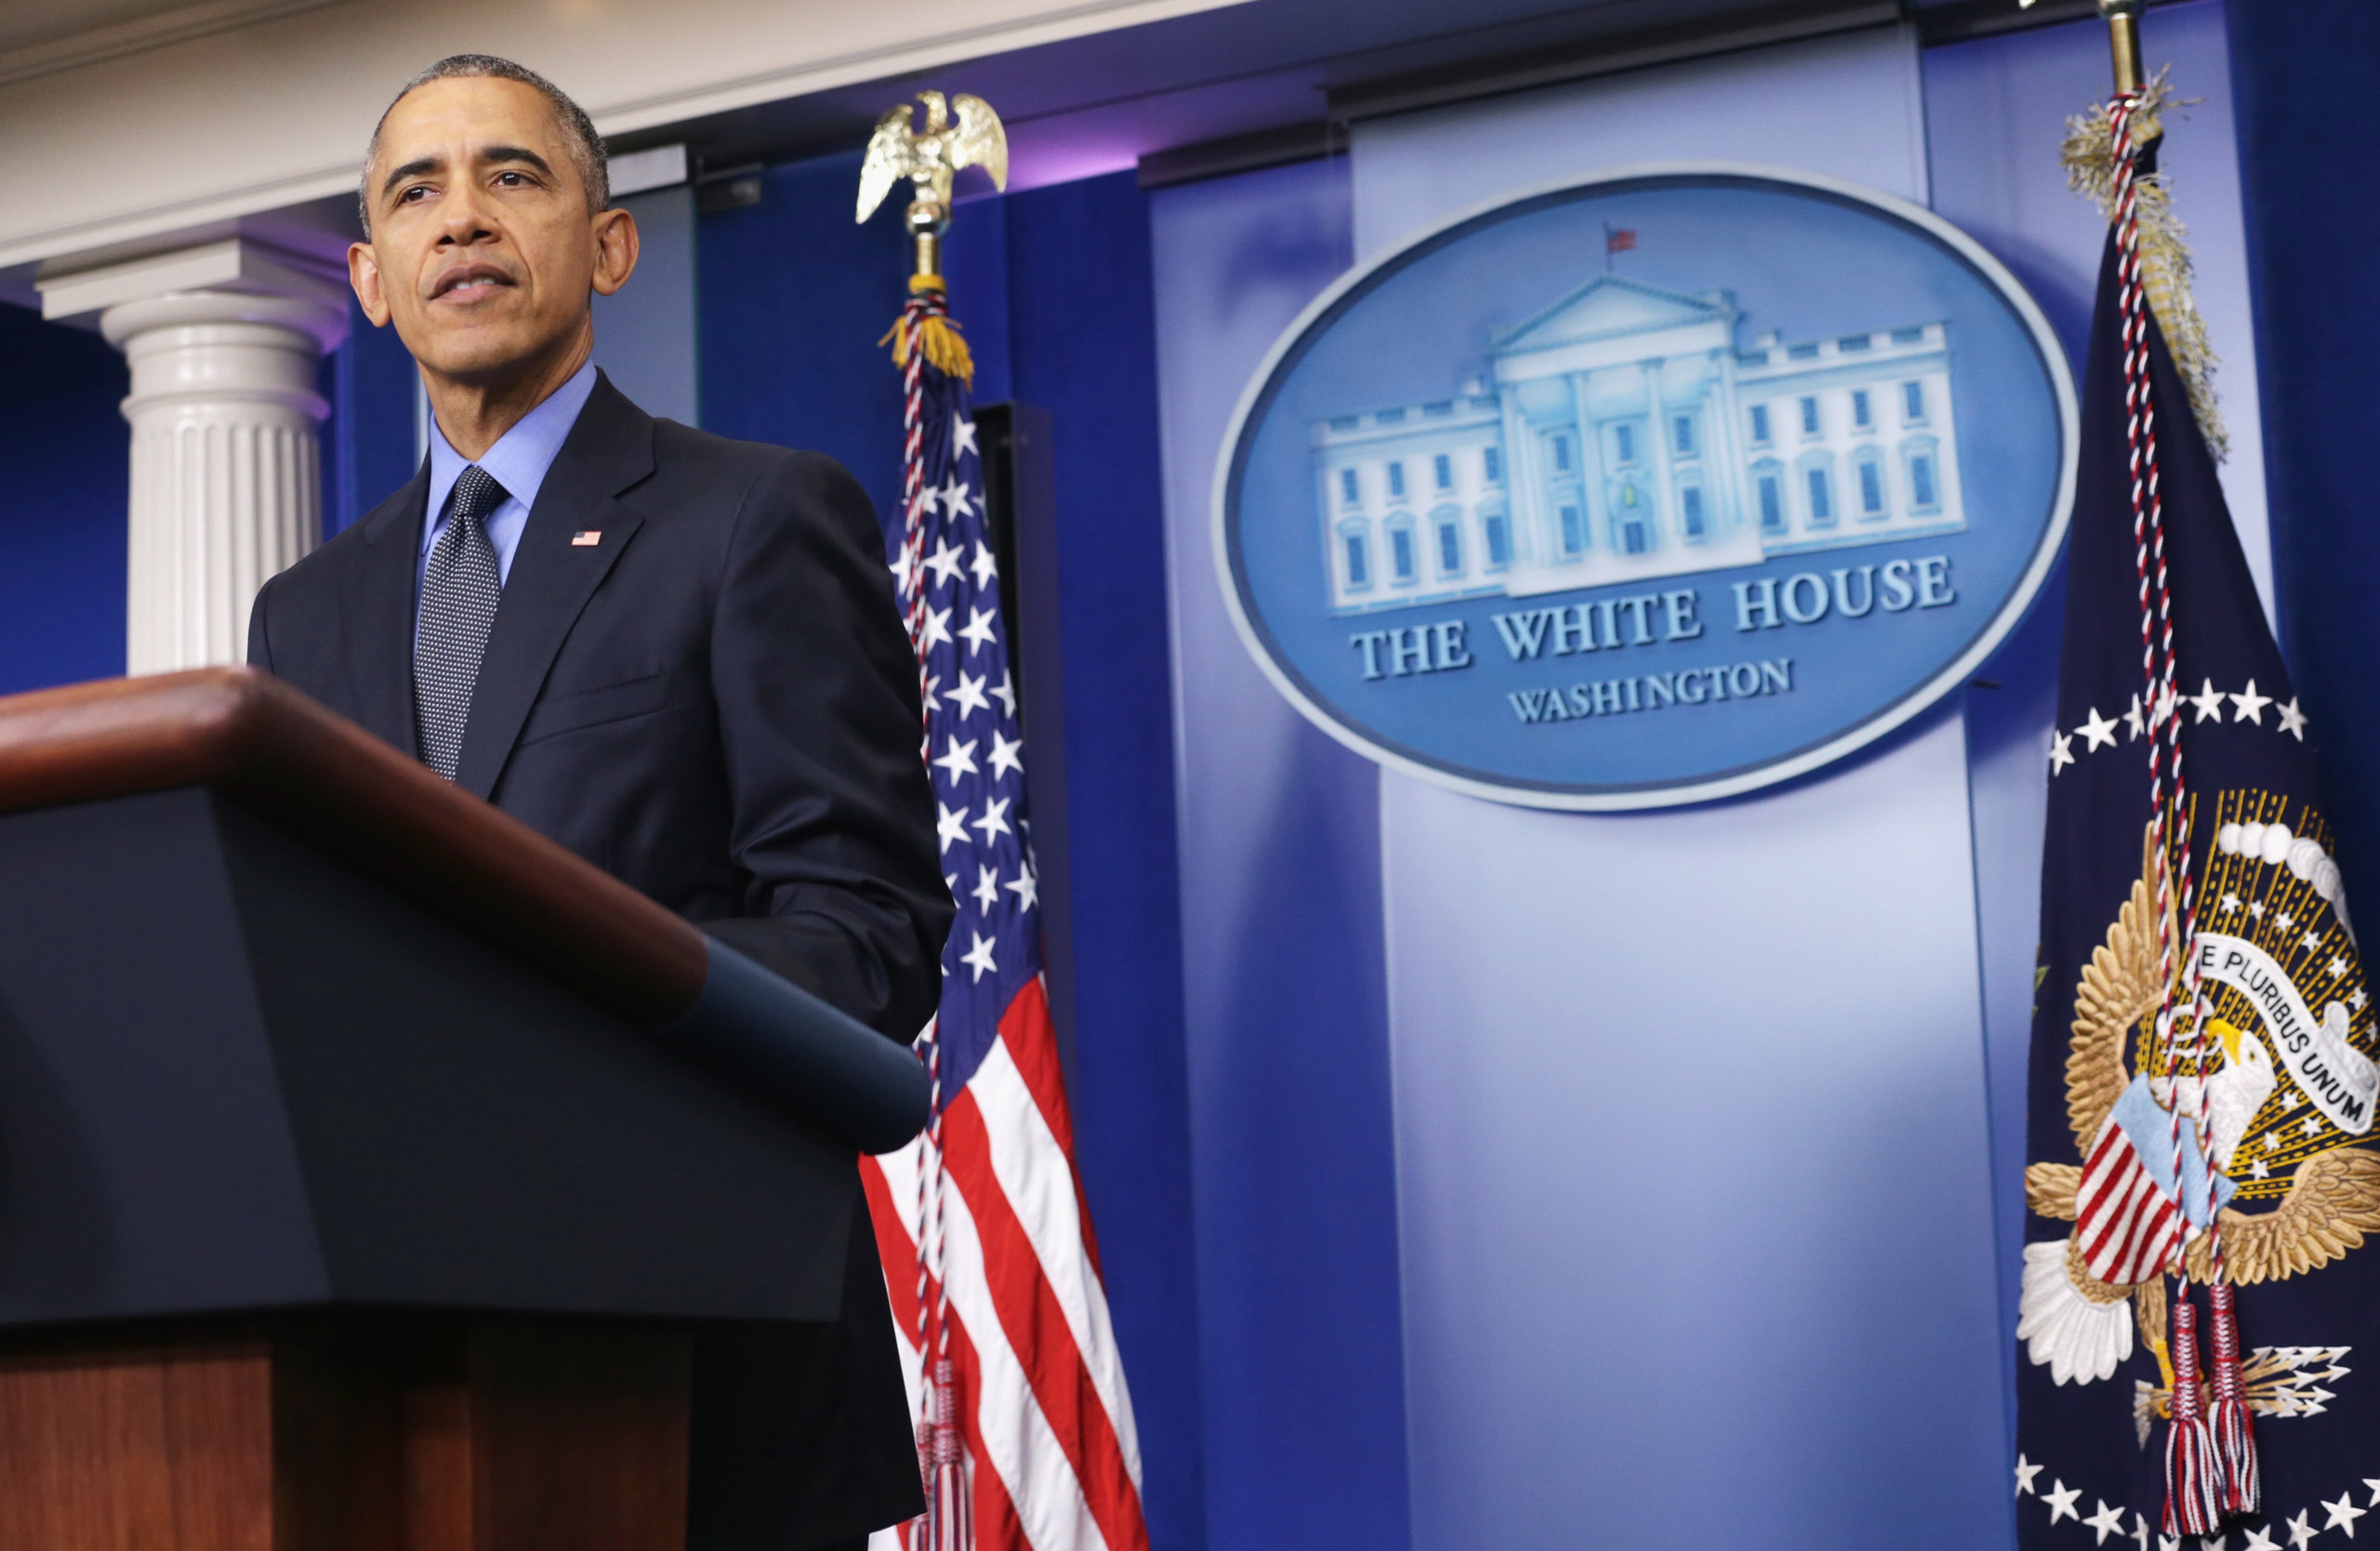 WASHINGTON, DC - DECEMBER 18: U.S. President Barack Obama speaks to the media during his year end news conference in the Brady Briefing Room at the White House December 18, 2015 in Washington, DC. Later today, Obama will travel to San Bernardino, California to meet with families of the 14 victims of the recent mass shooting, before departing to Hawaii for Christmas vacation, returning January 3, 2016.    (Photo by Alex Wong/Getty Images)